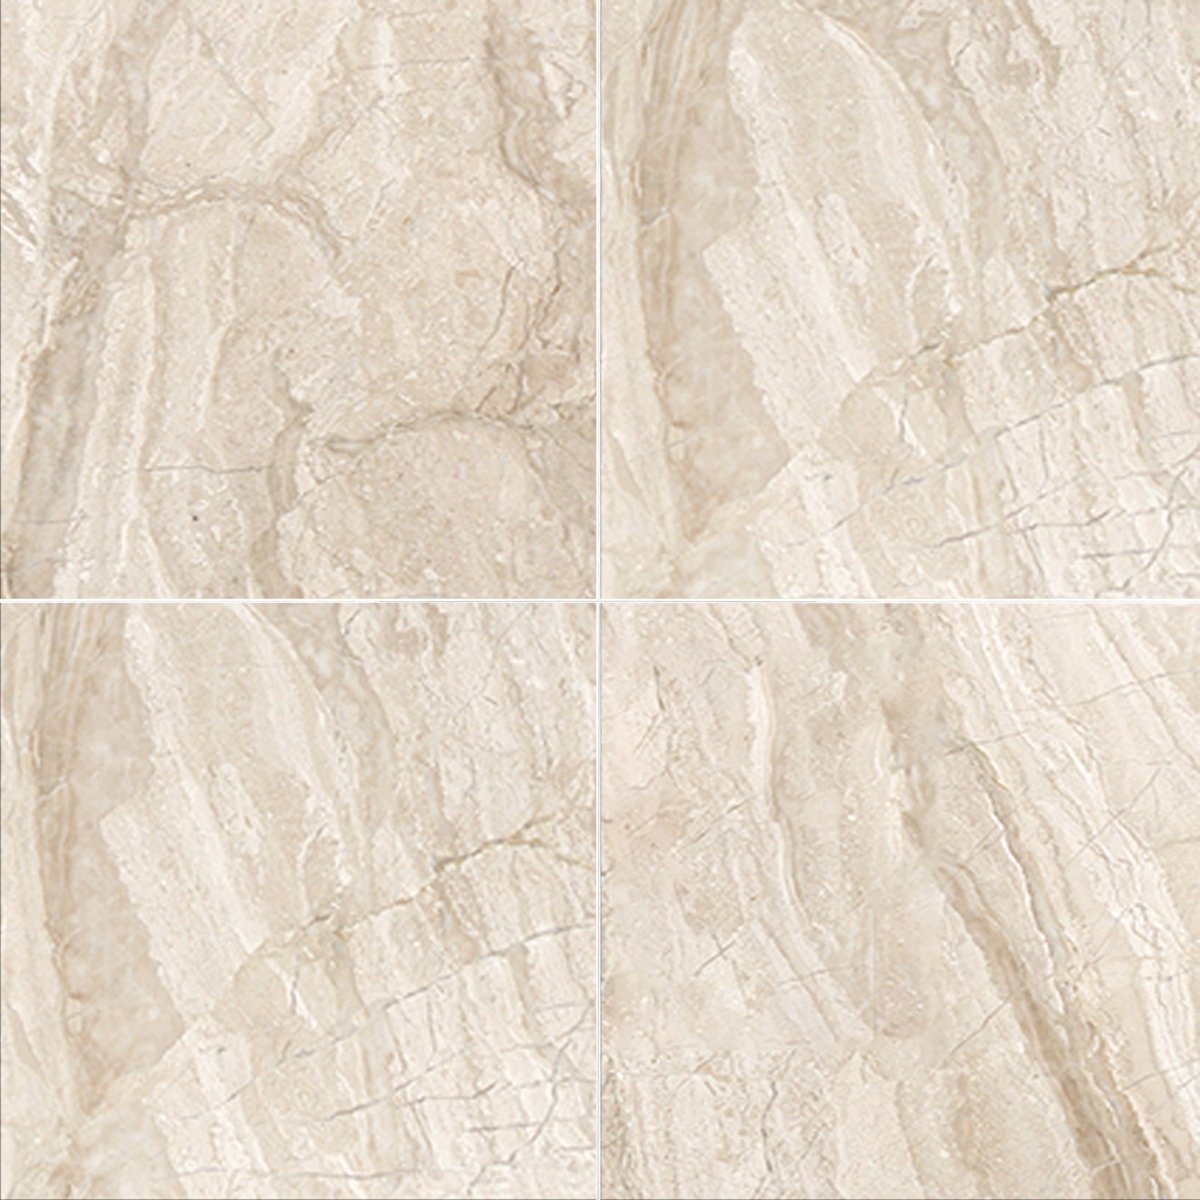 Diano Royale Honed Marble Field Tile 12''x12''x3/8''